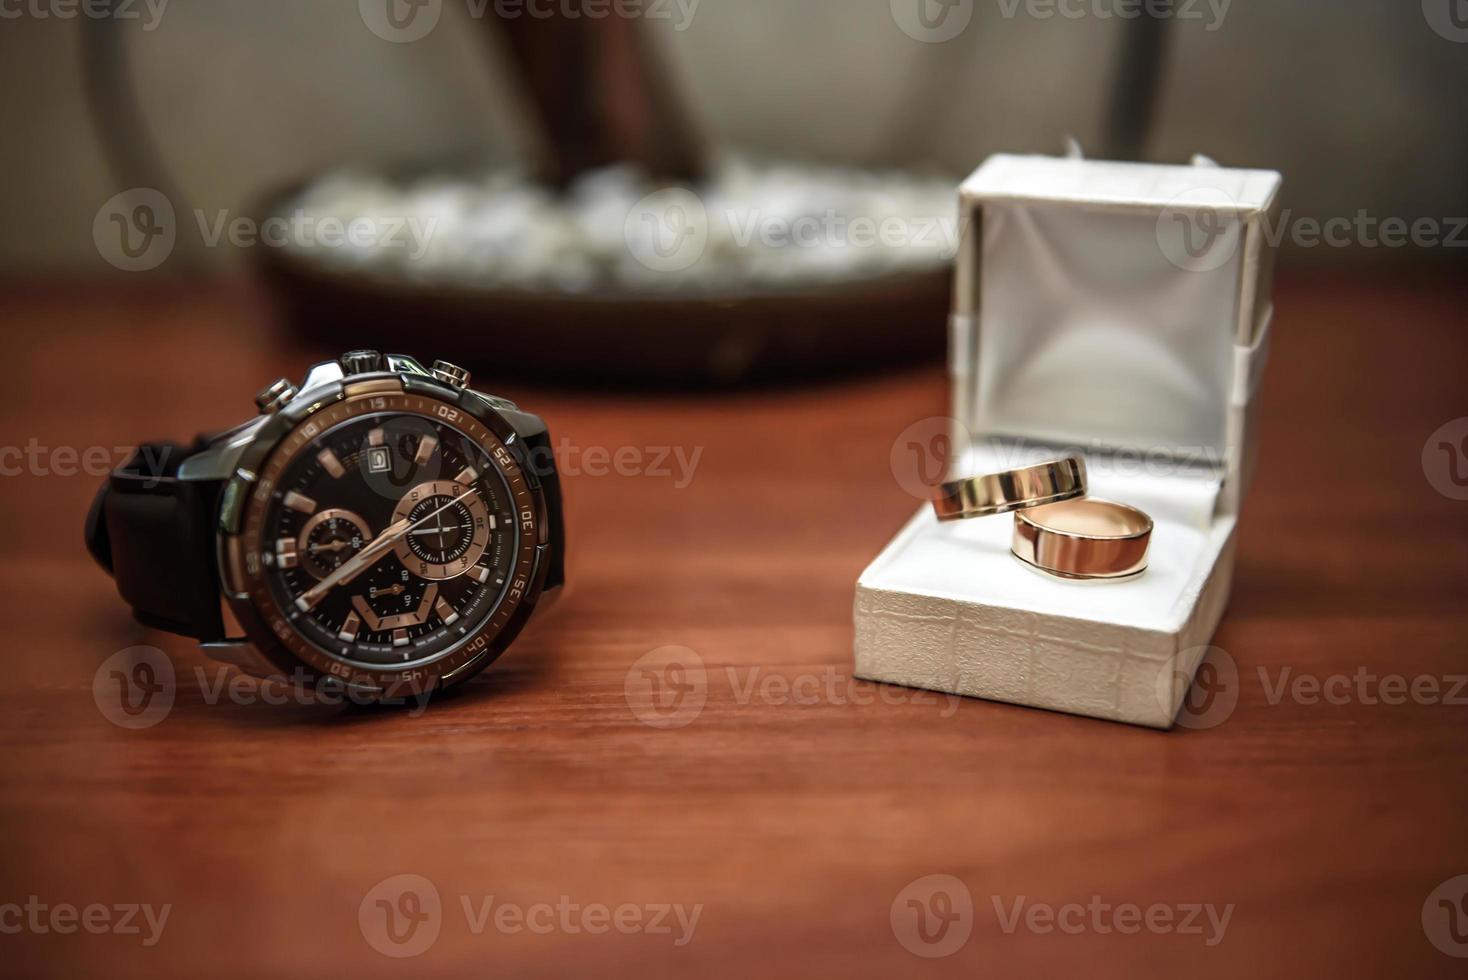 wedding ring in a box and watch the groom photo